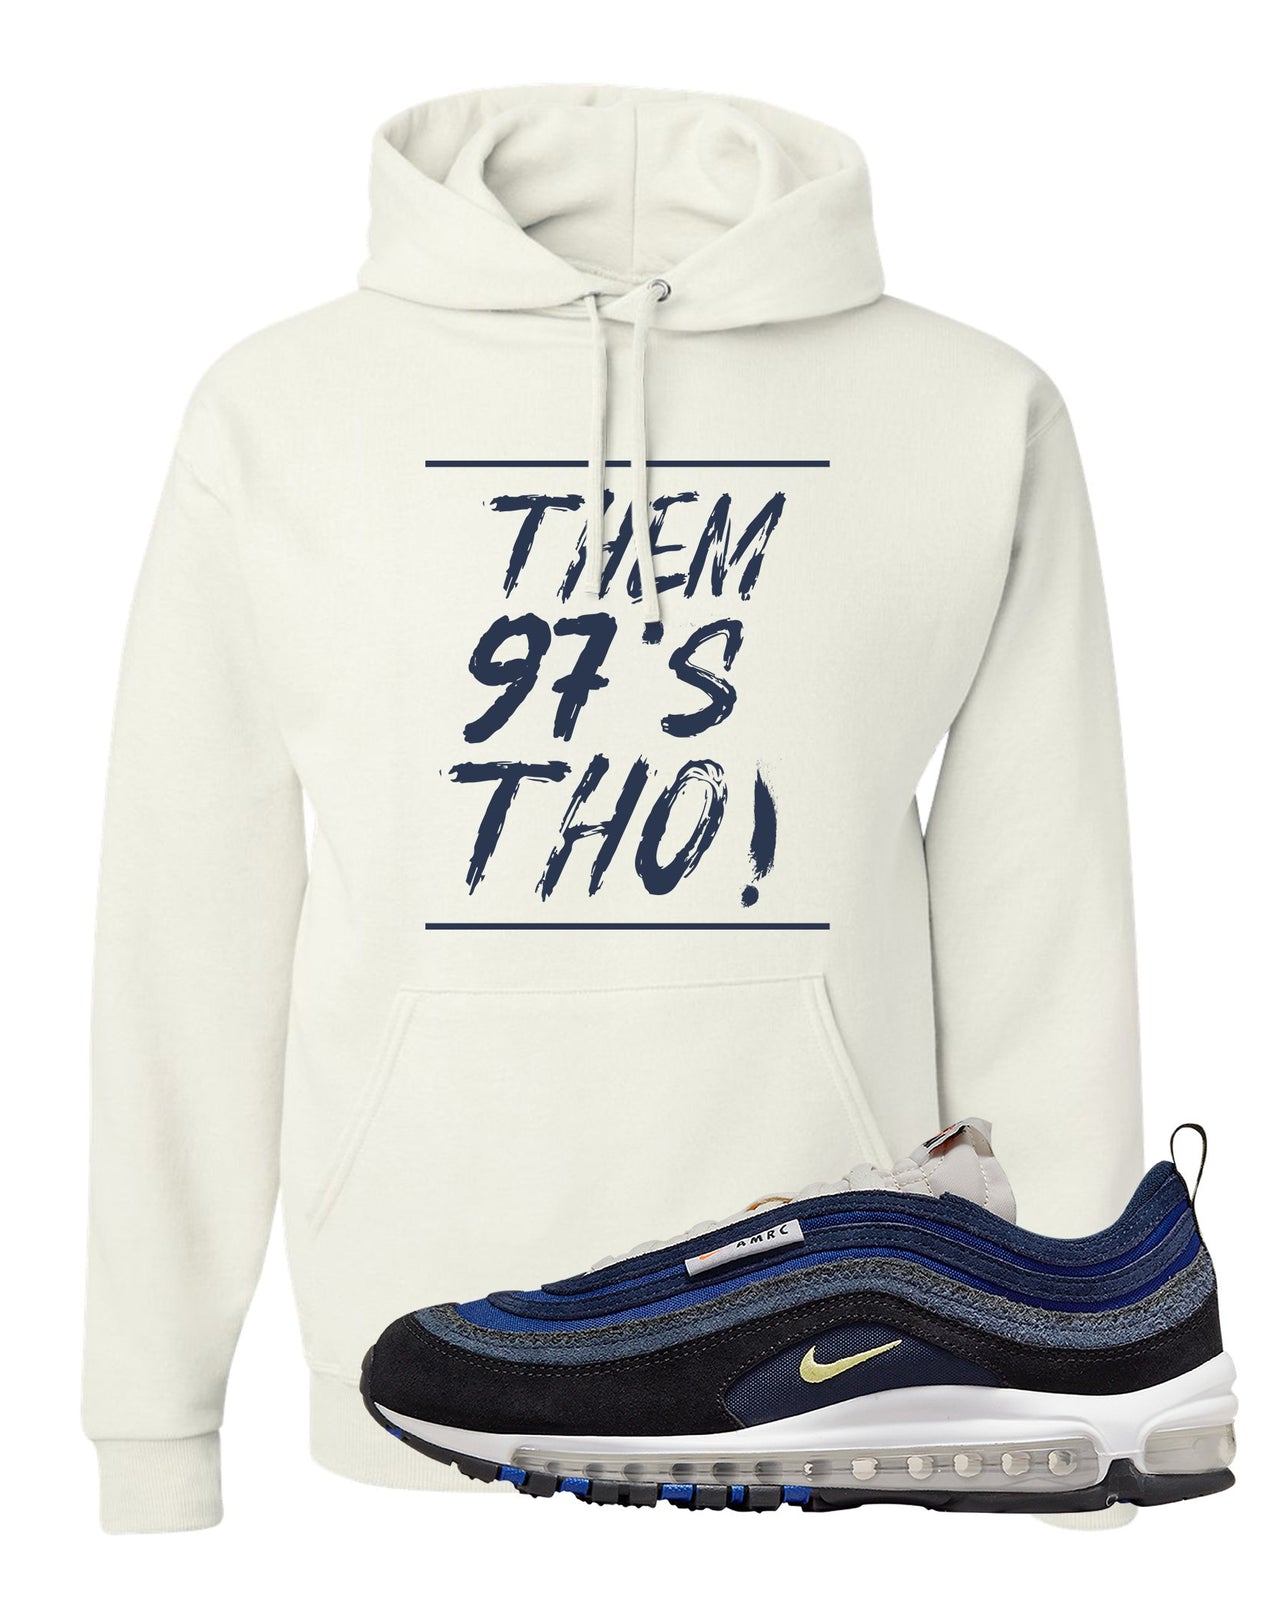 Navy Suede AMRC 97s Hoodie | Them 97's Tho, White